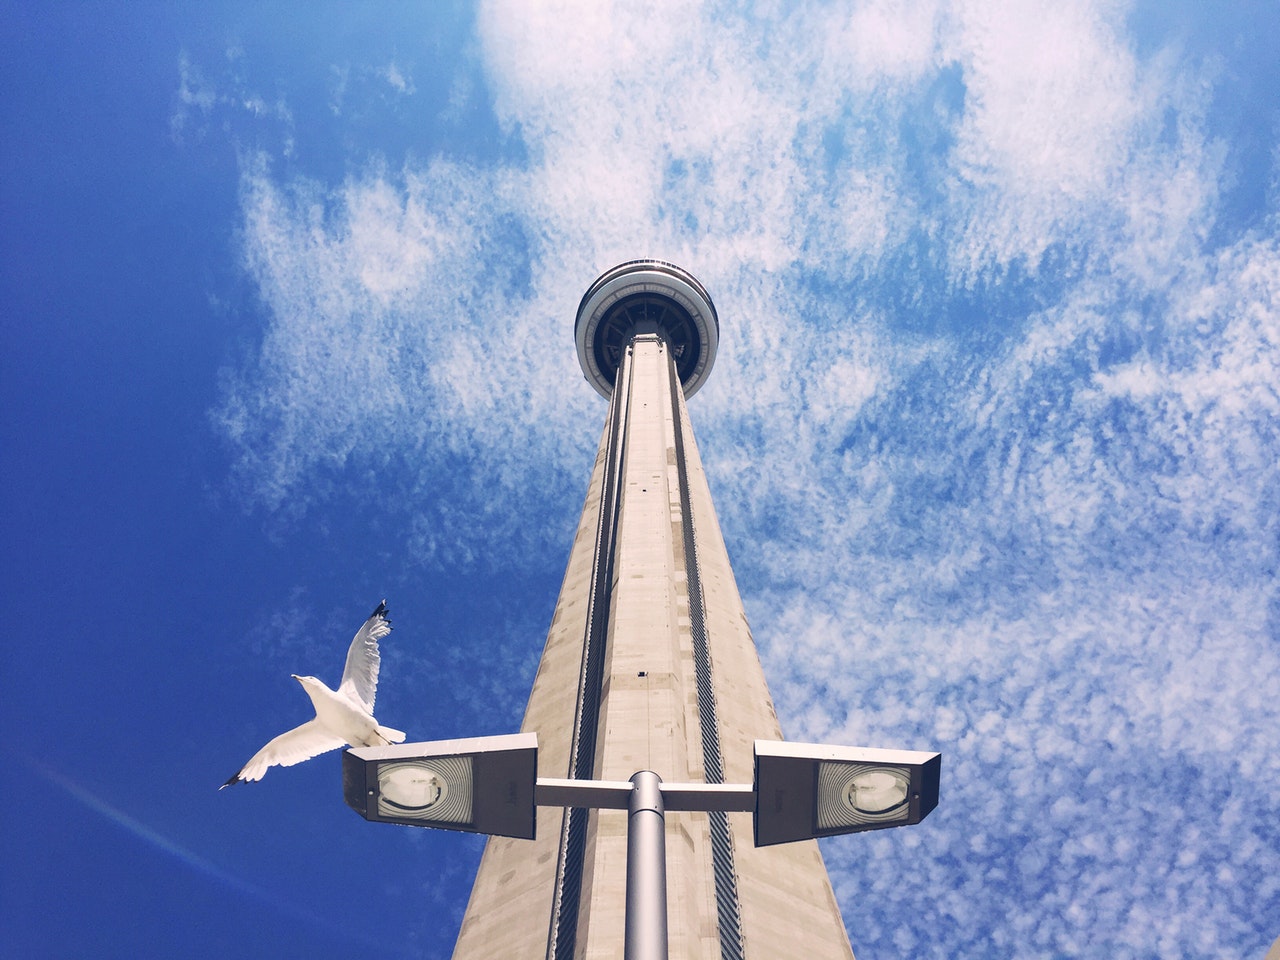 CN Tower and bird on lamp